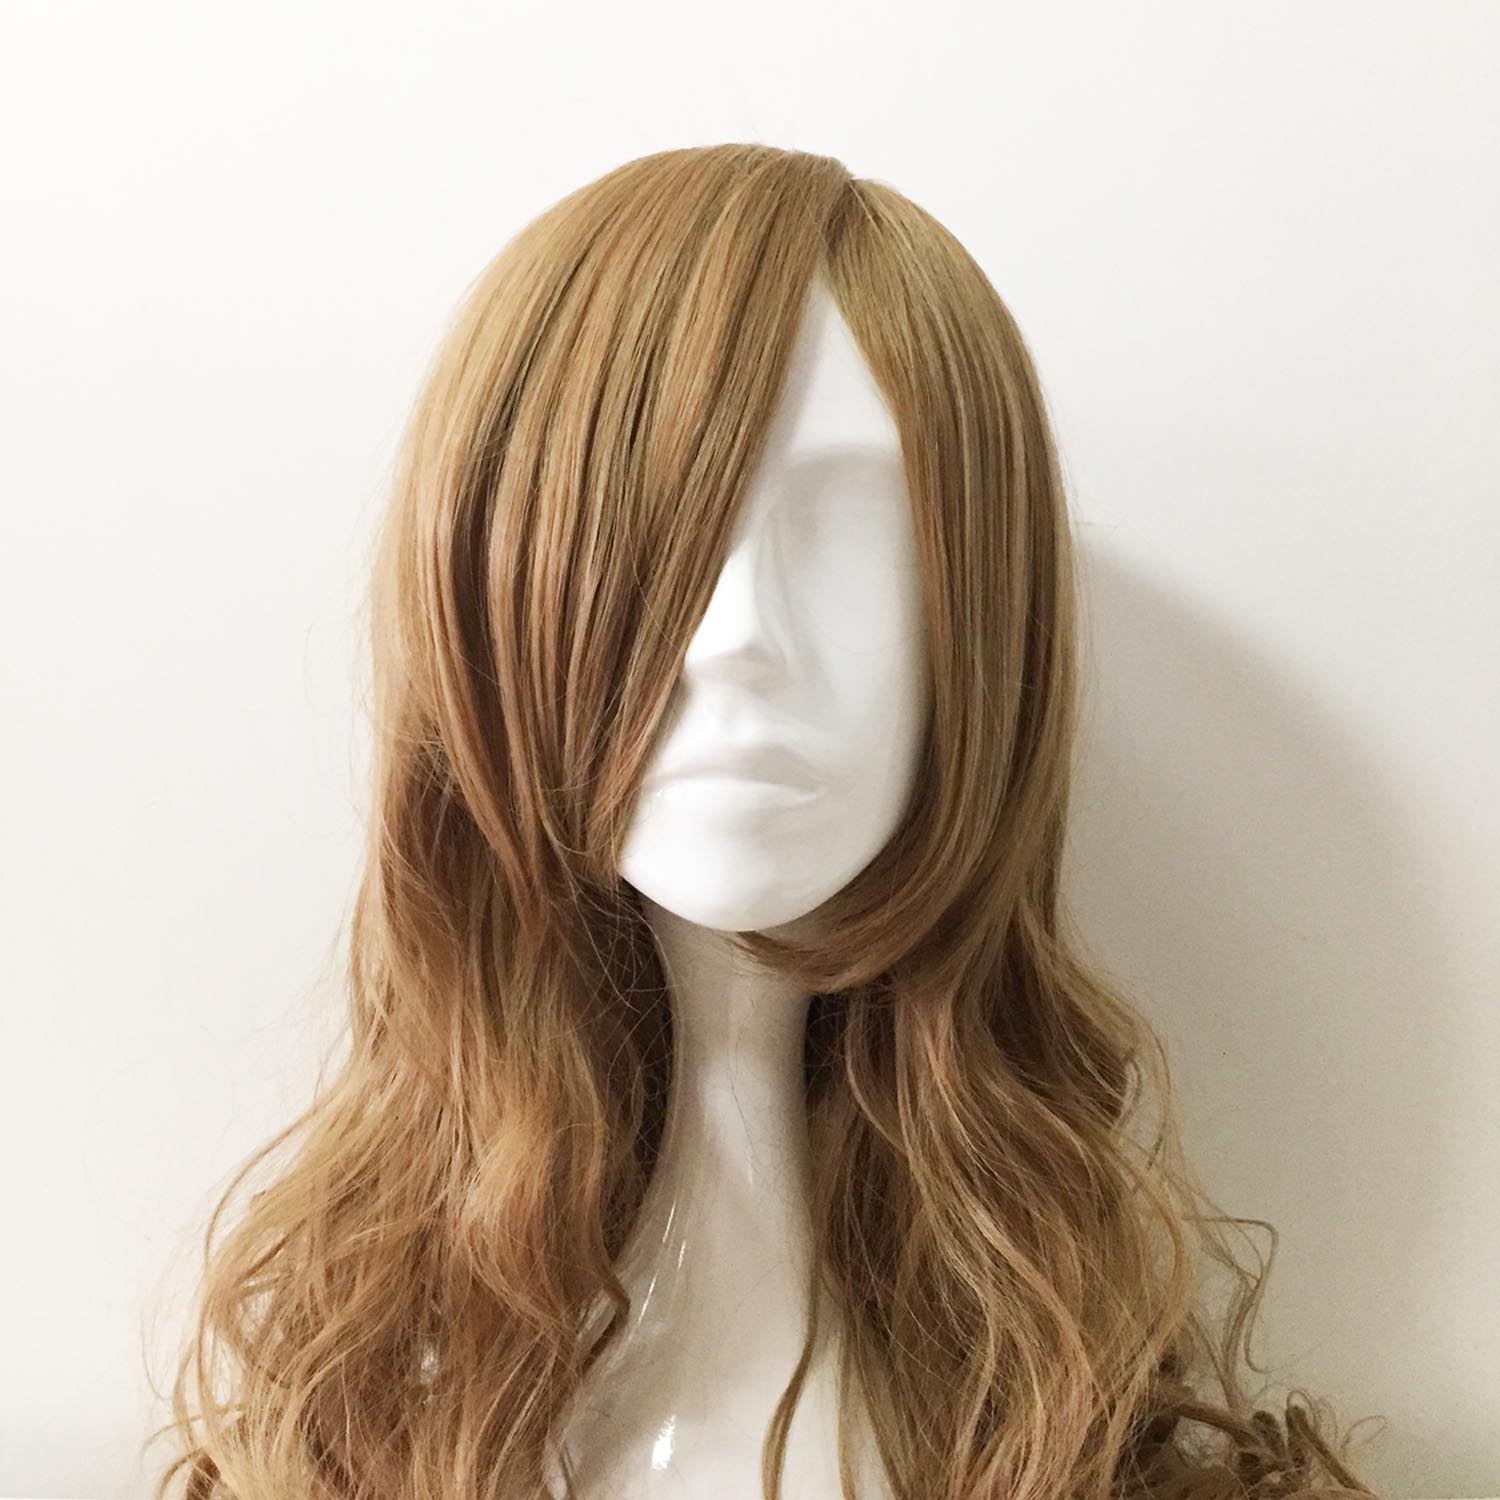 nevermindyrhead Women Brown Long Curly Side Swept Bangs Cosplay Wig